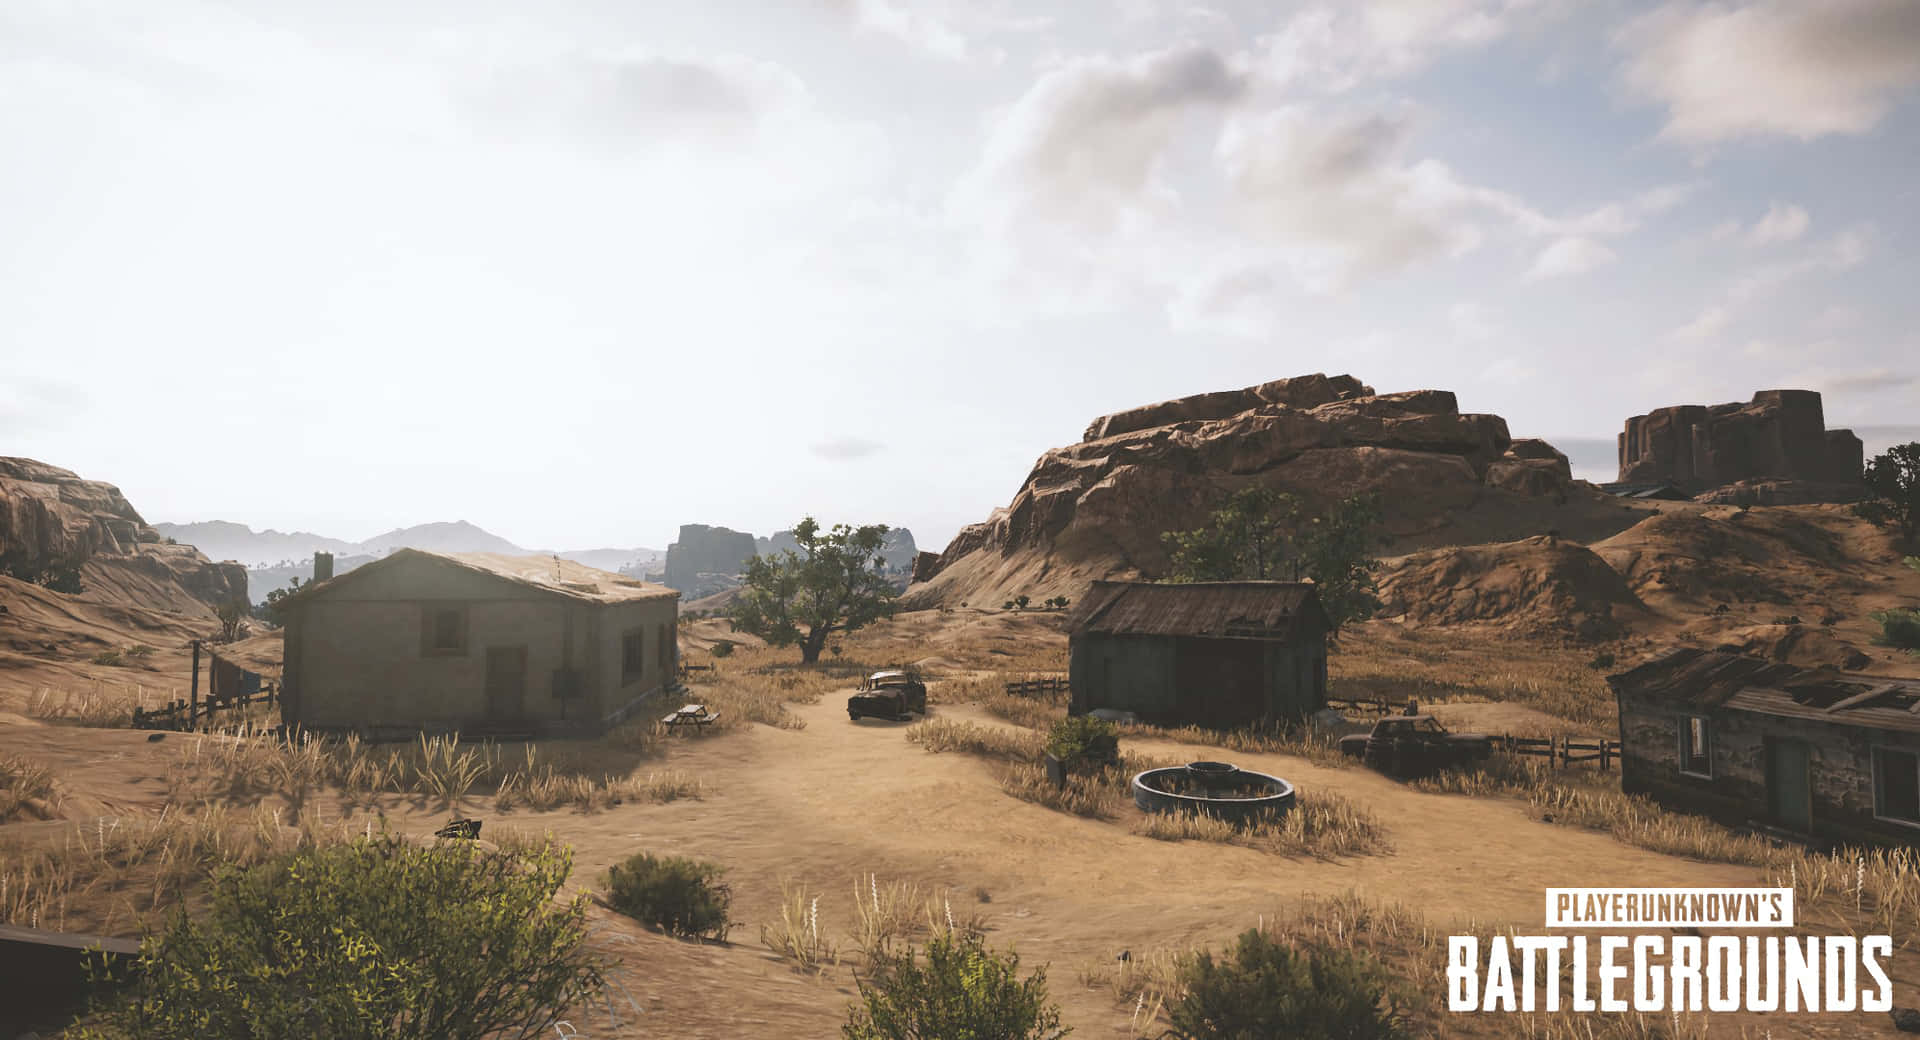 A Screenshot Of The Desert In The Game